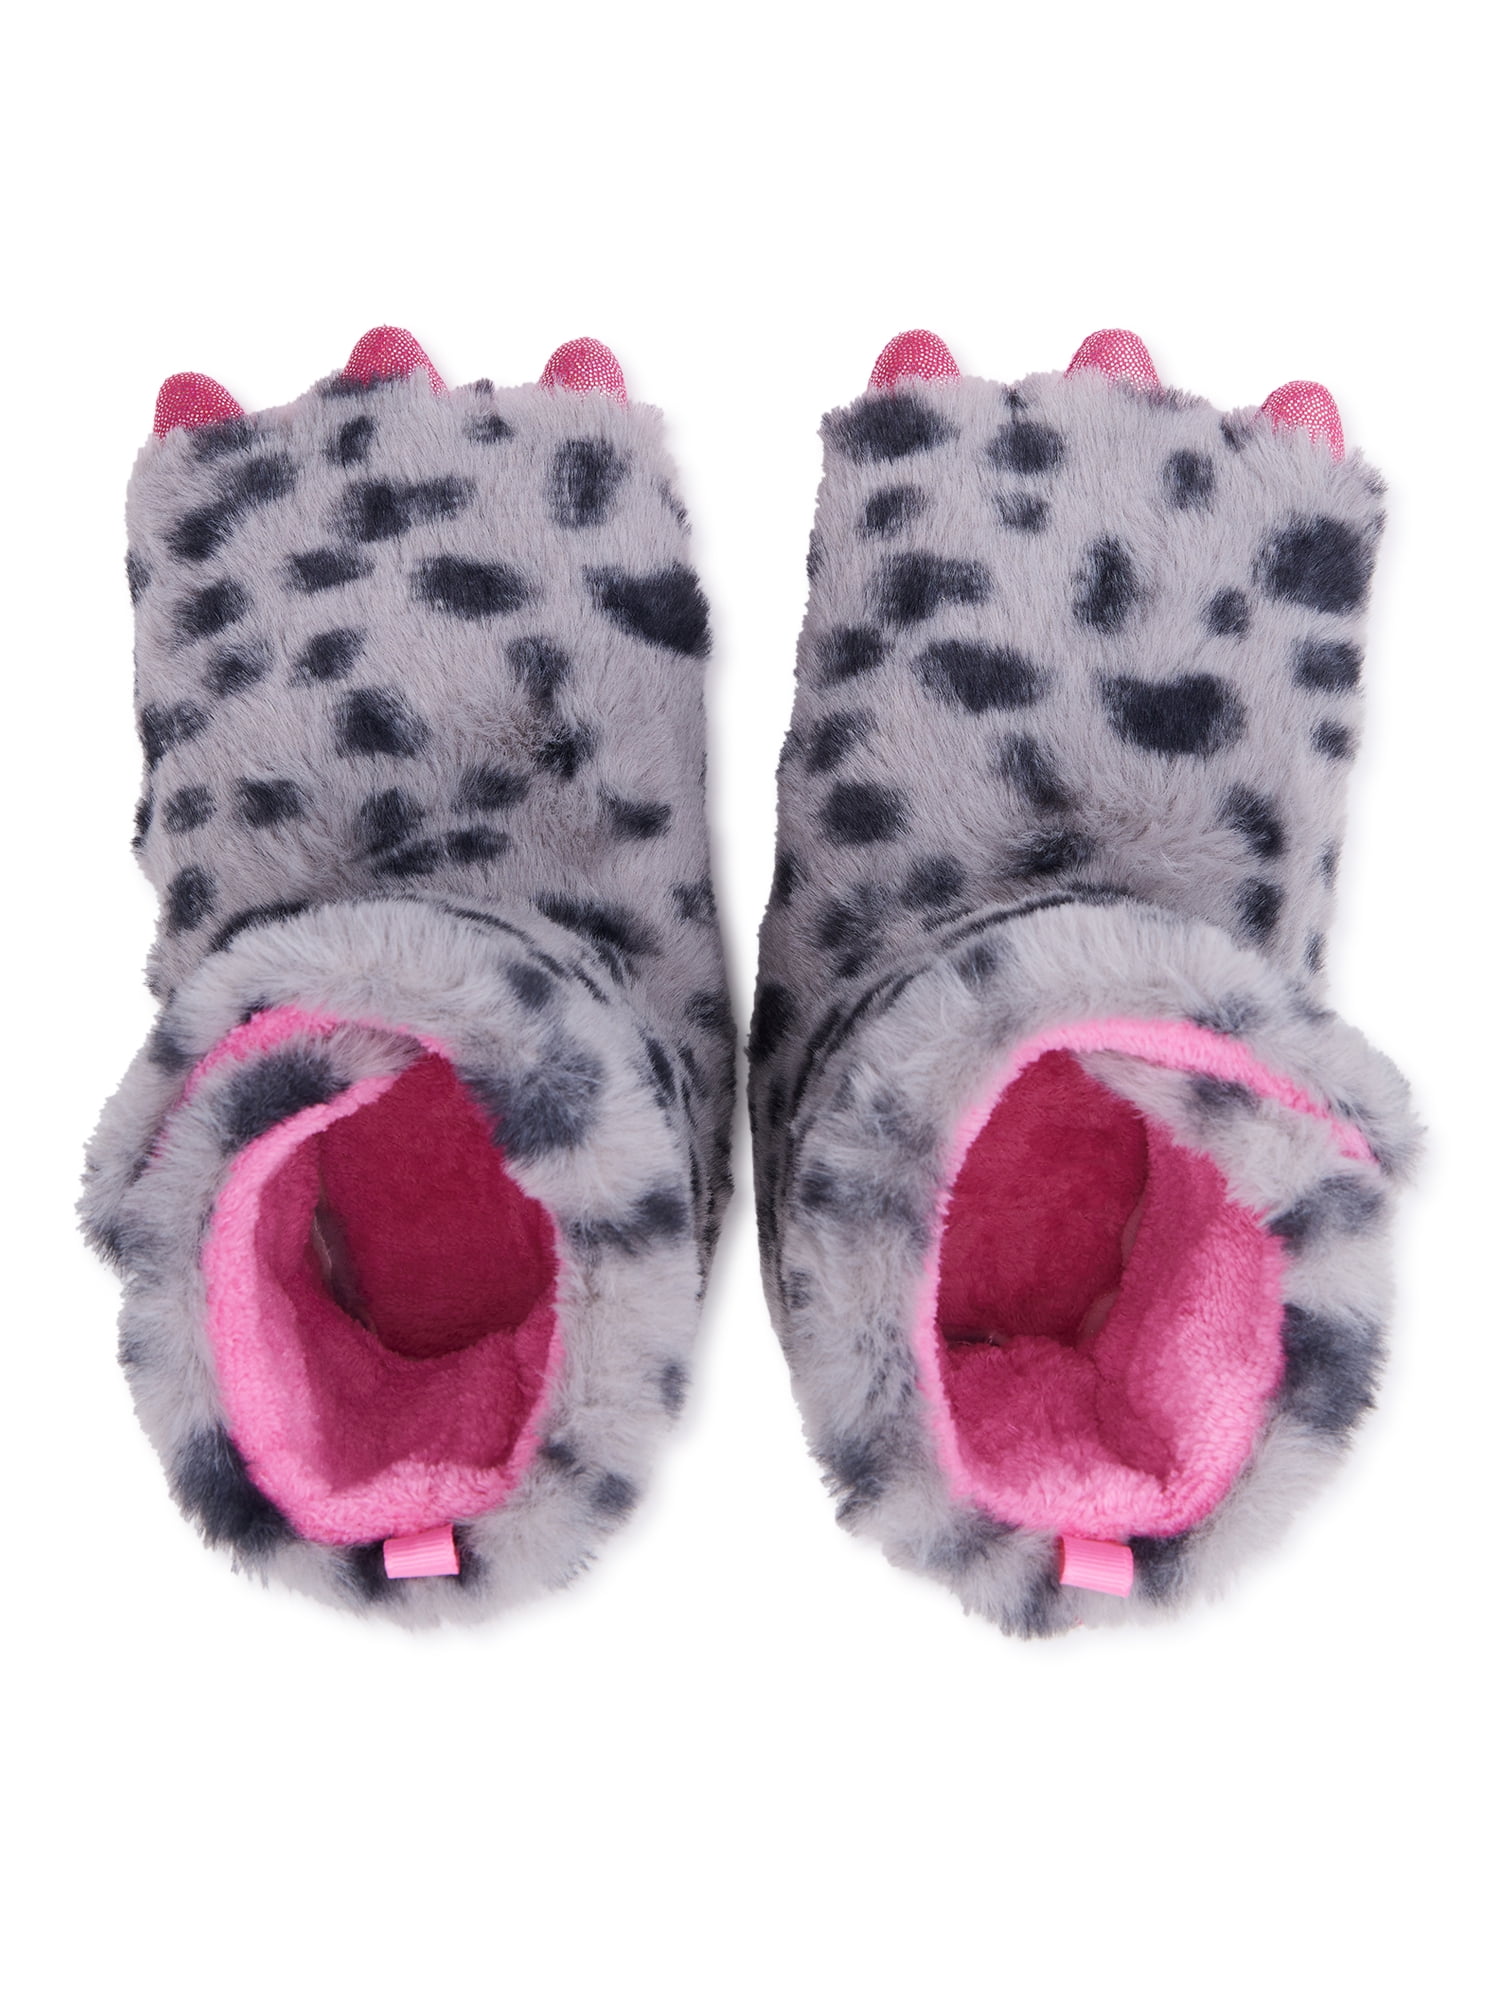 Nation Girl Light Up Monster Claw Bootie Slippers, Sizes 5/6-11/12 - Walmart.com